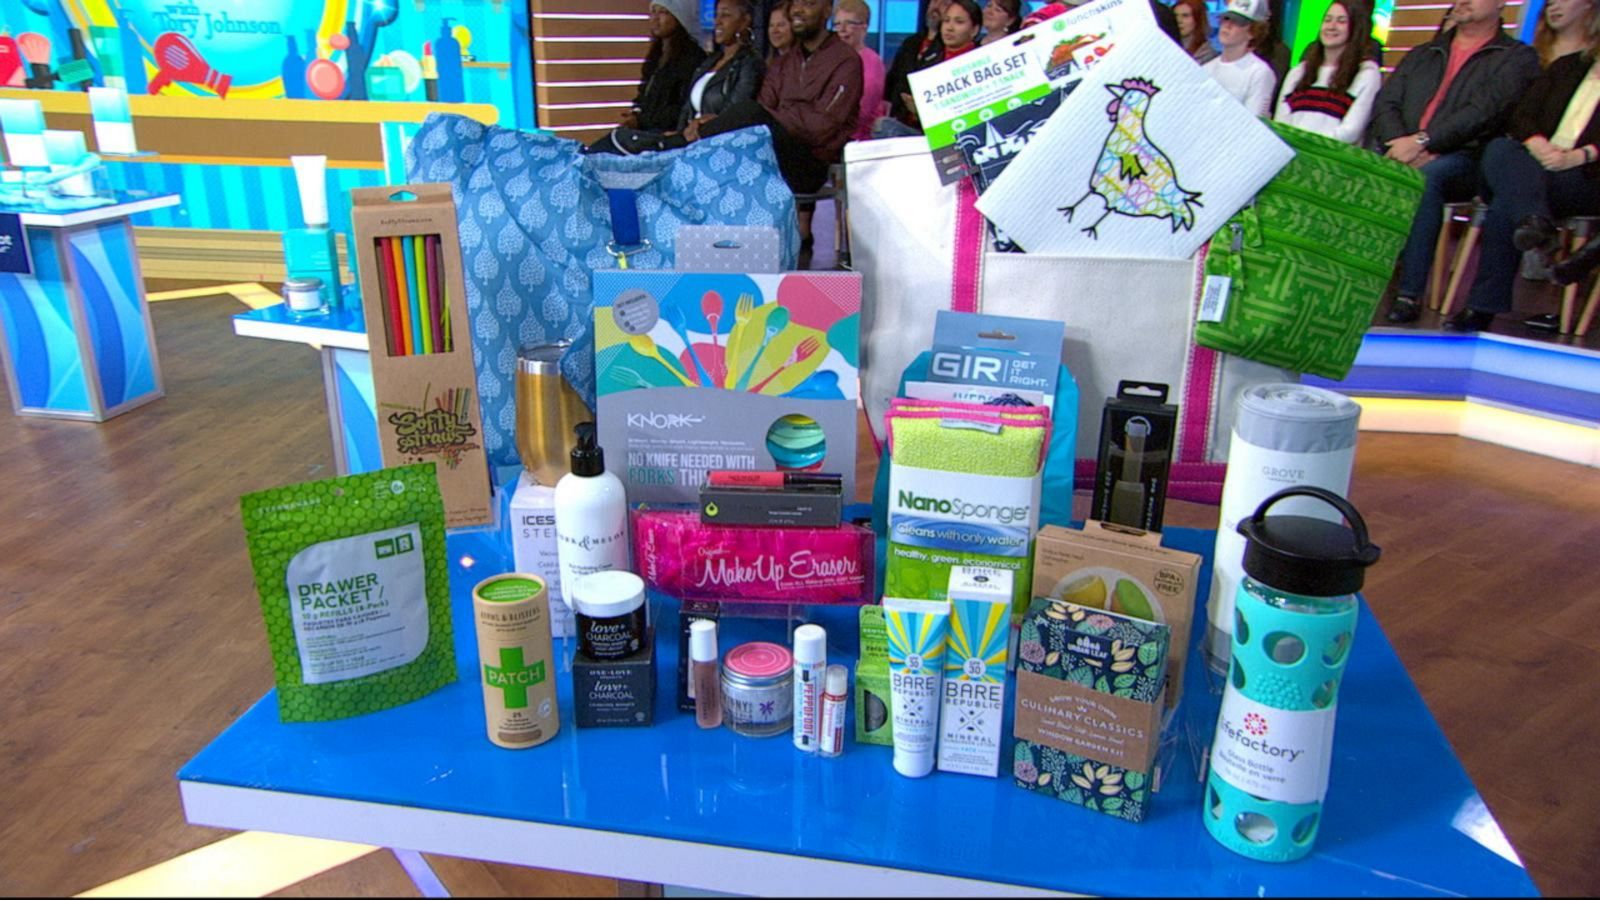 'GMA' Deals and Steals on beauty buys, Discover the Deals box Good